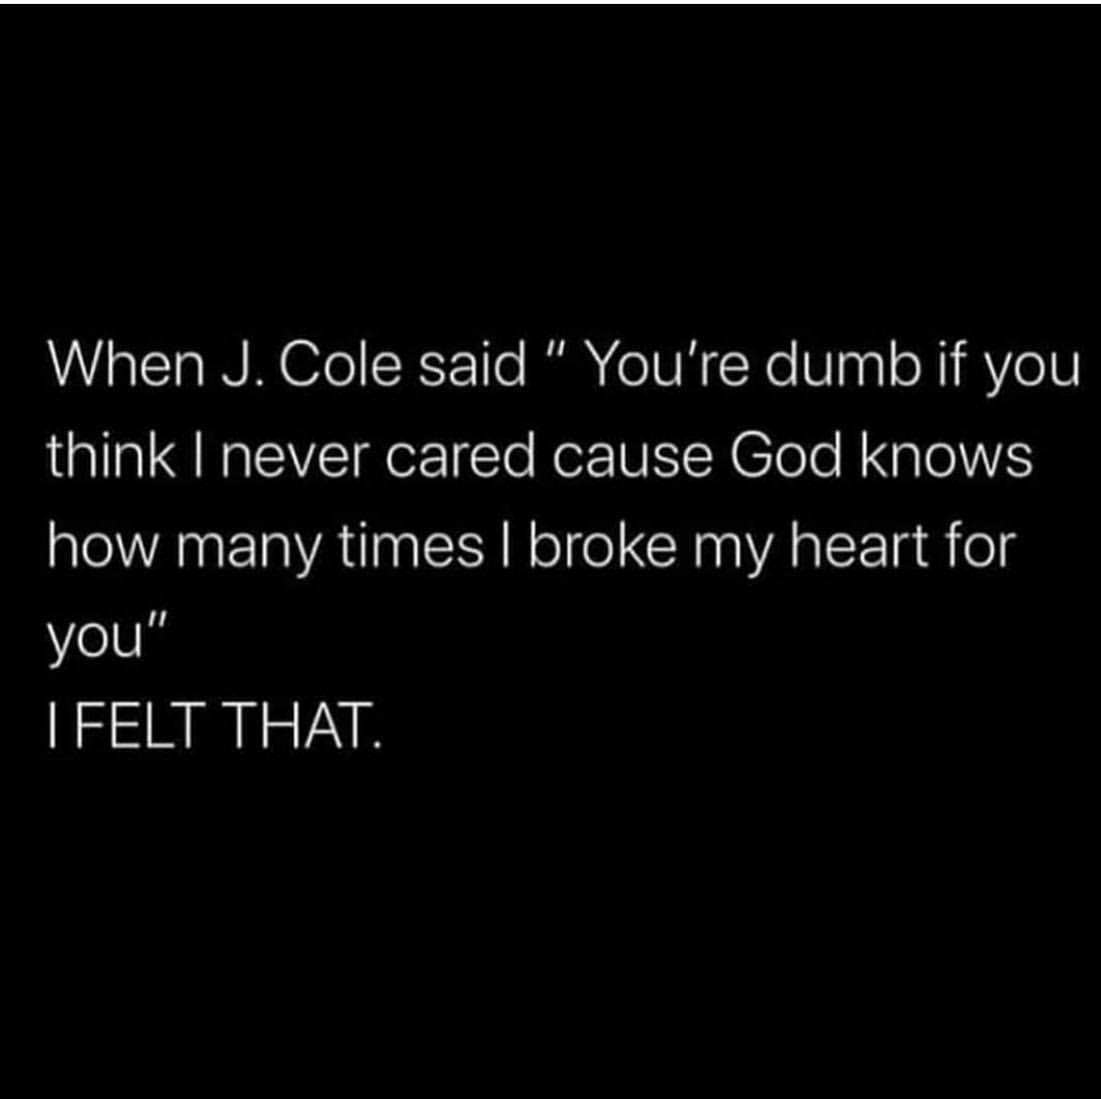 When J. Cole said: "You're dumb if you think I never cared cause God knows how many times I broke my heart for you".  I felt that.